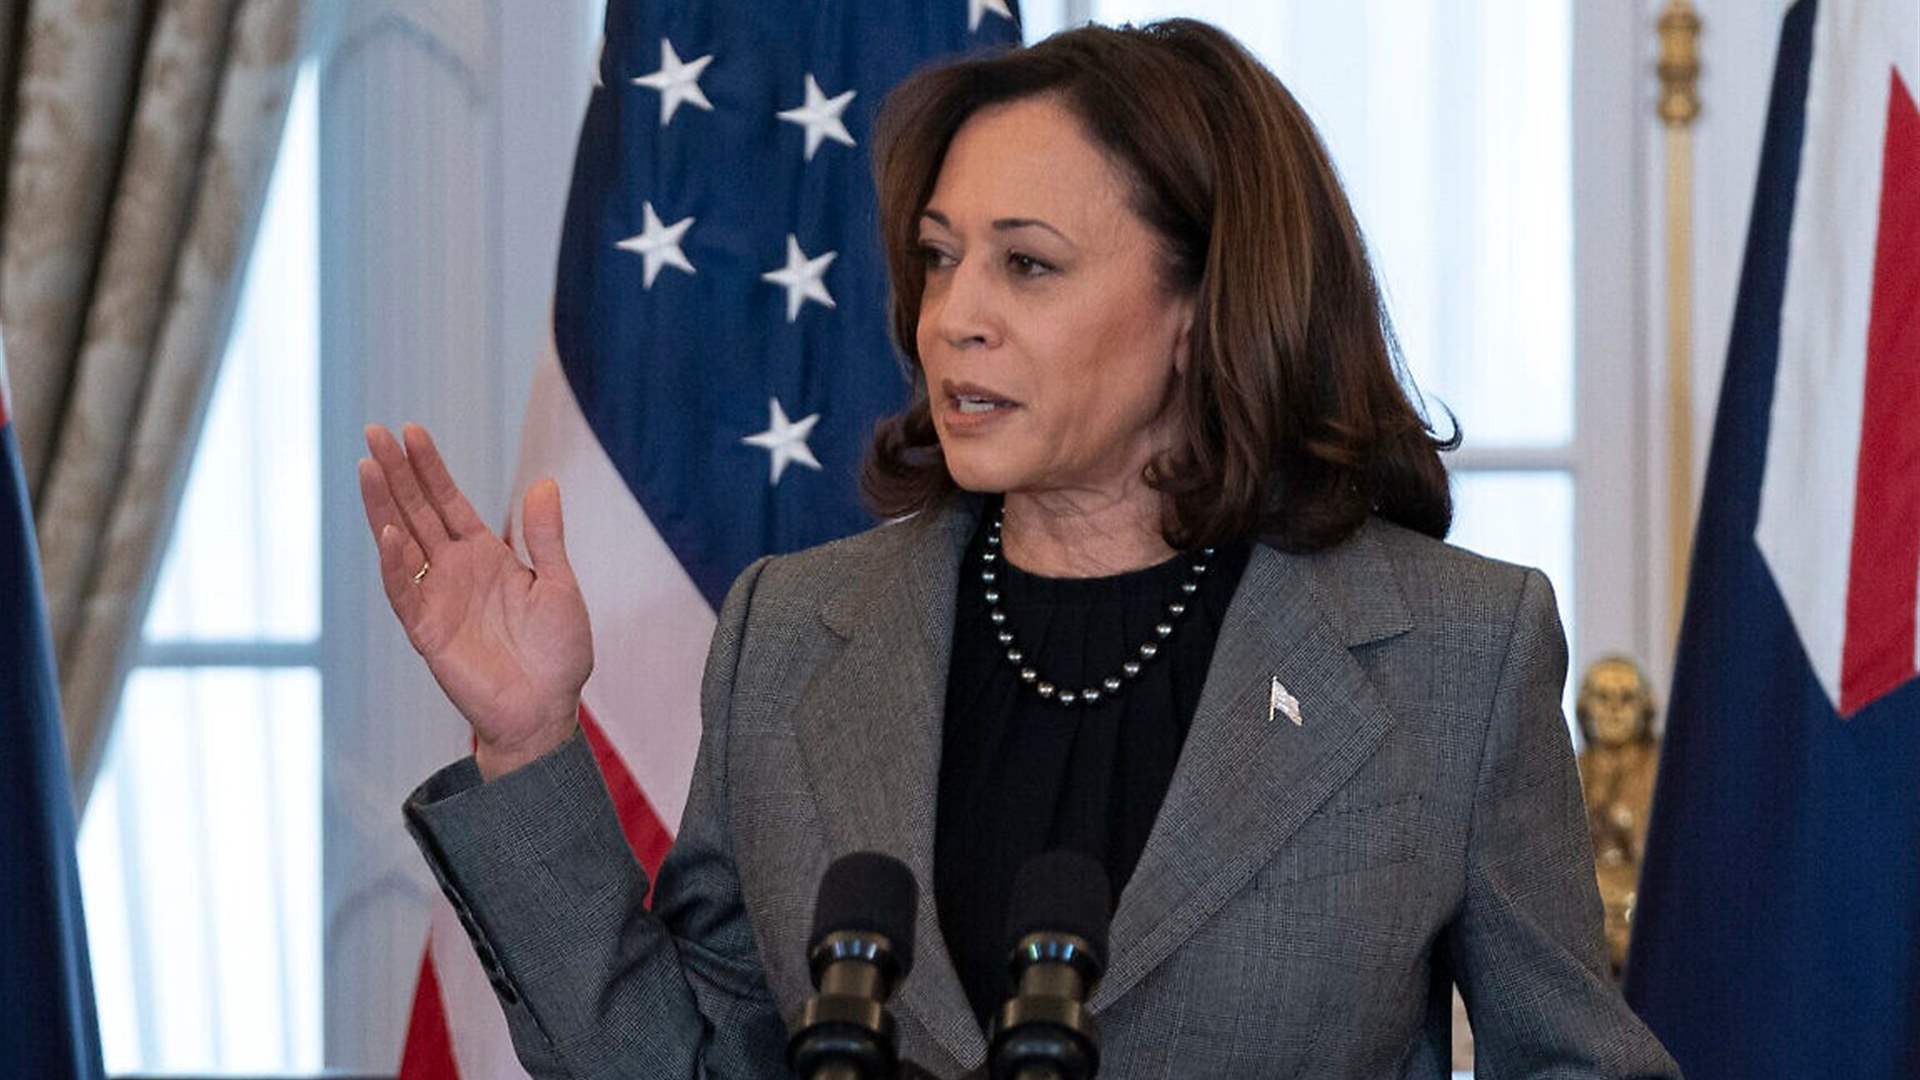 VP Harris says US stands firm on Israel&#39;s right to self-defense